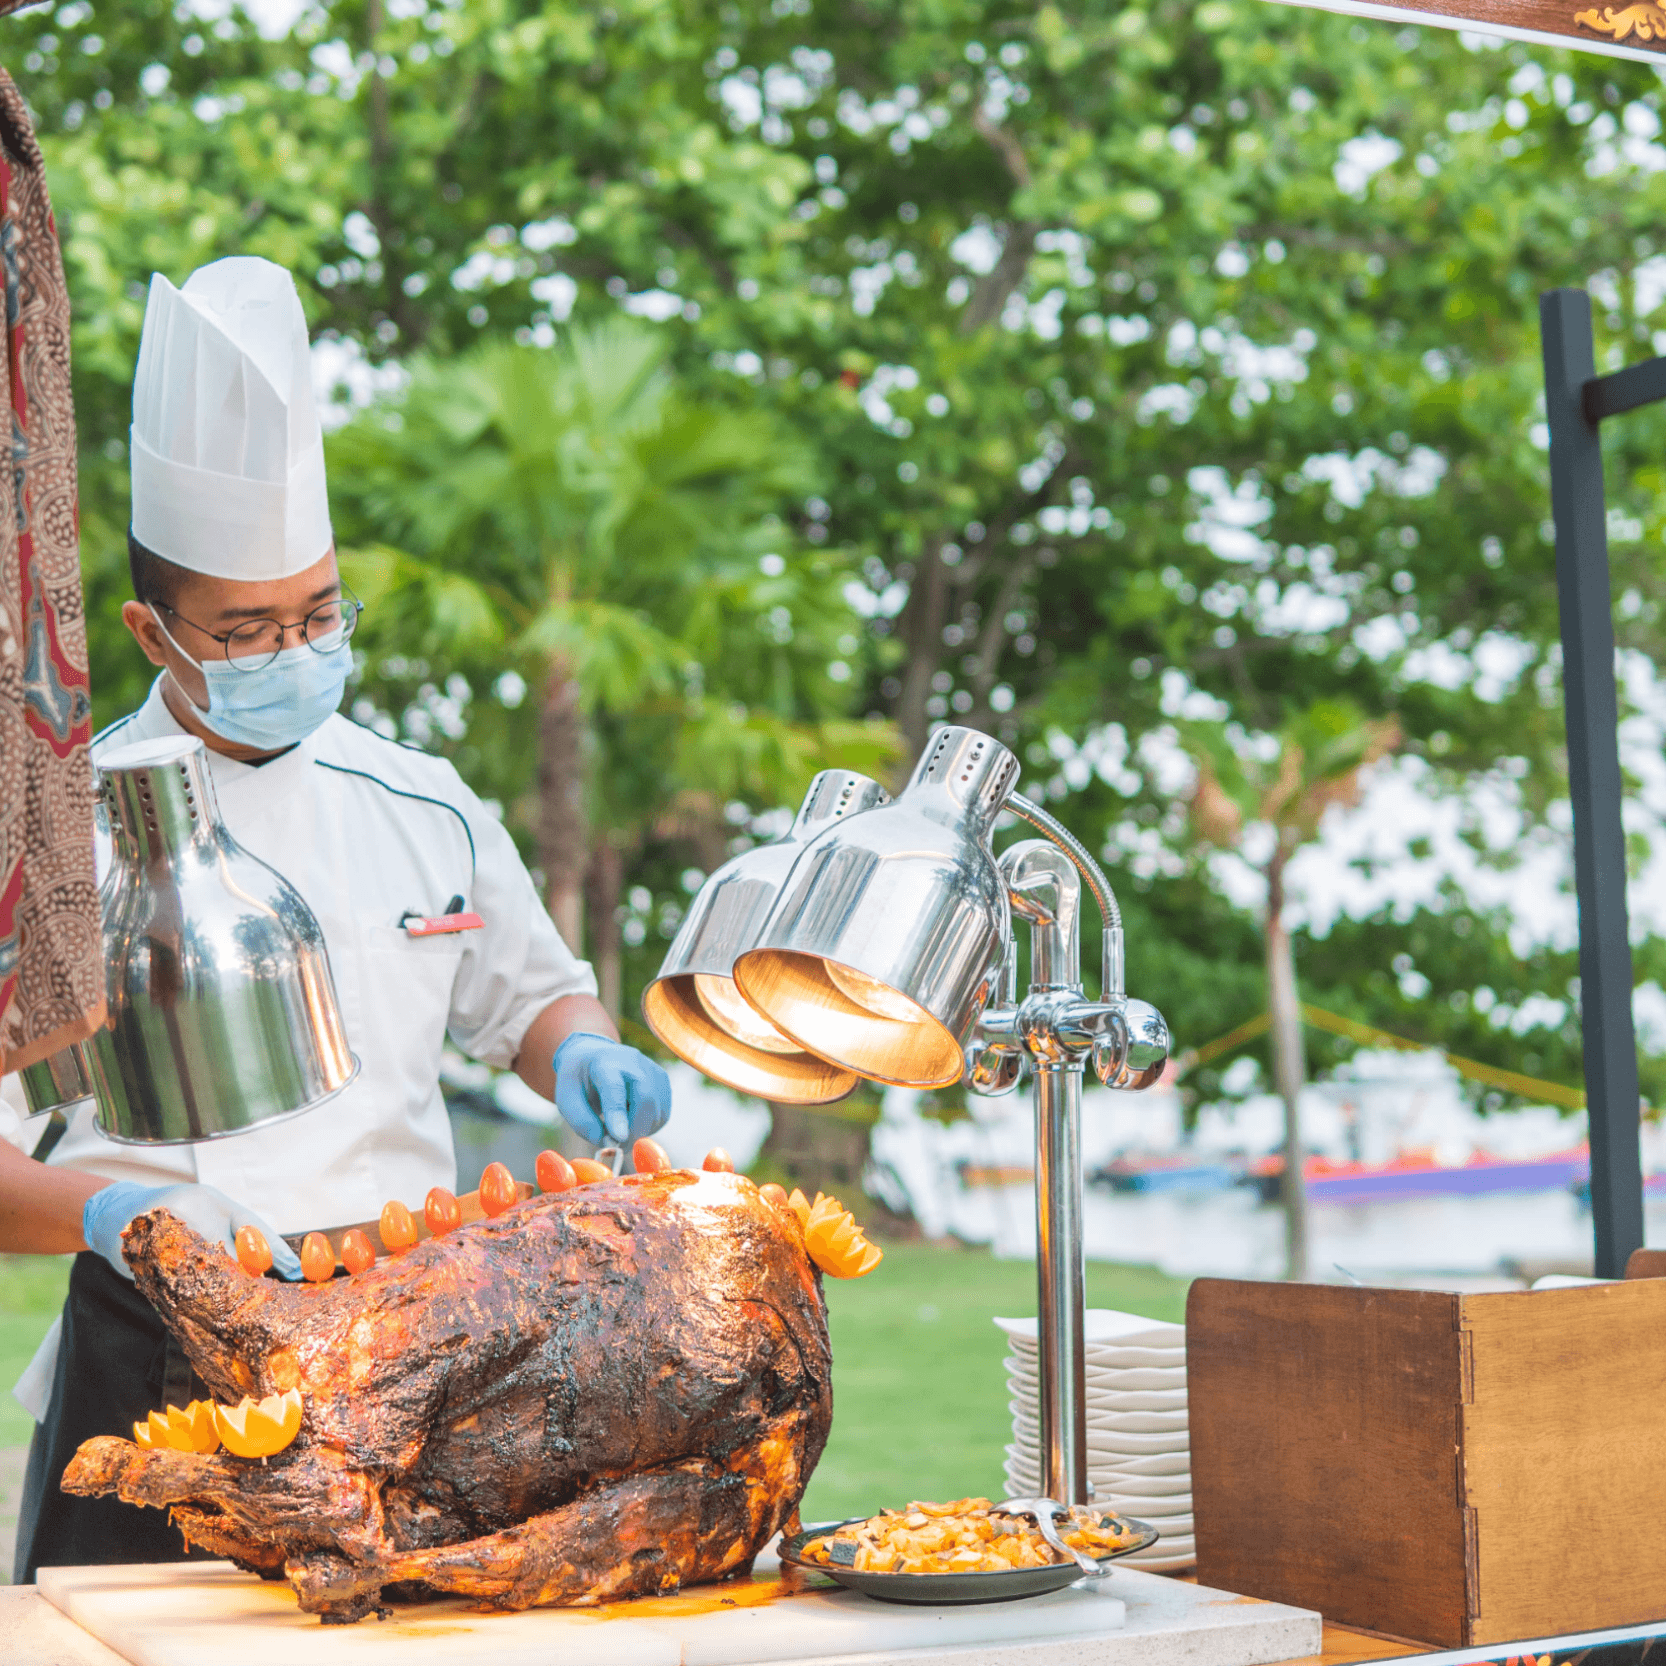 Lexis Suites Penang offers their unique al fresco and beachfront setting for Ramadan buffet diners